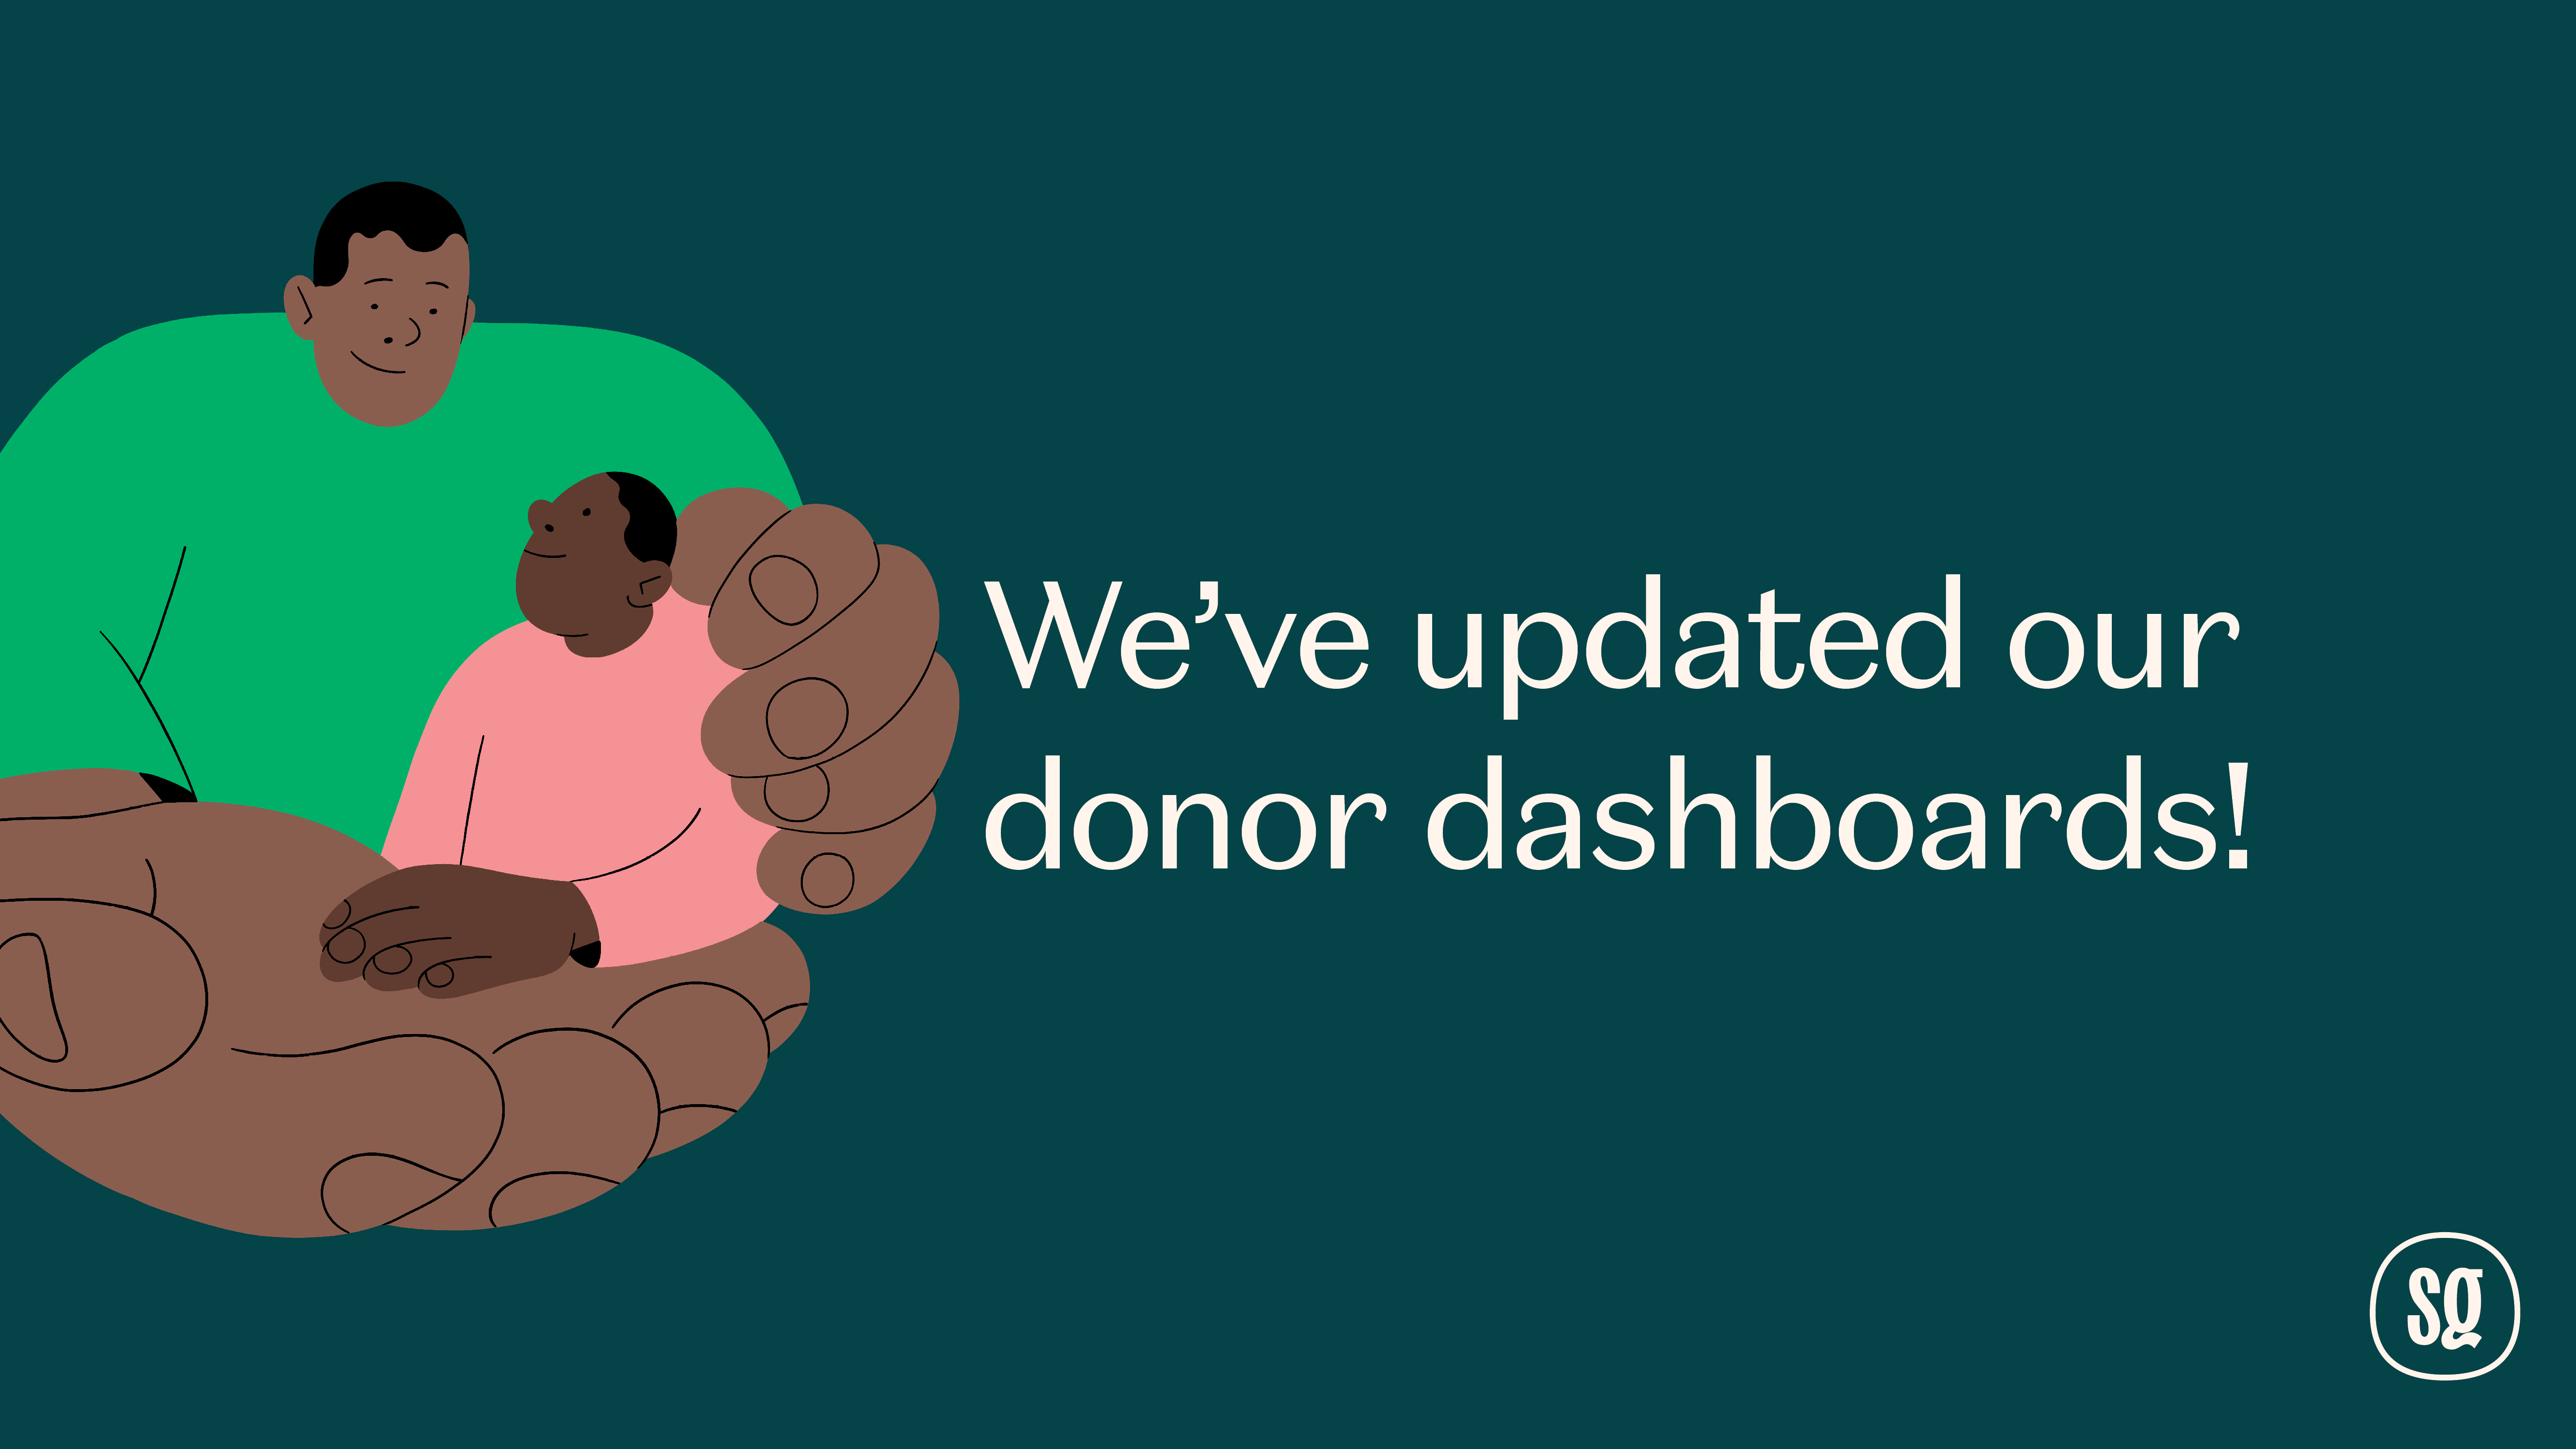 We've updated our donor dashboards!